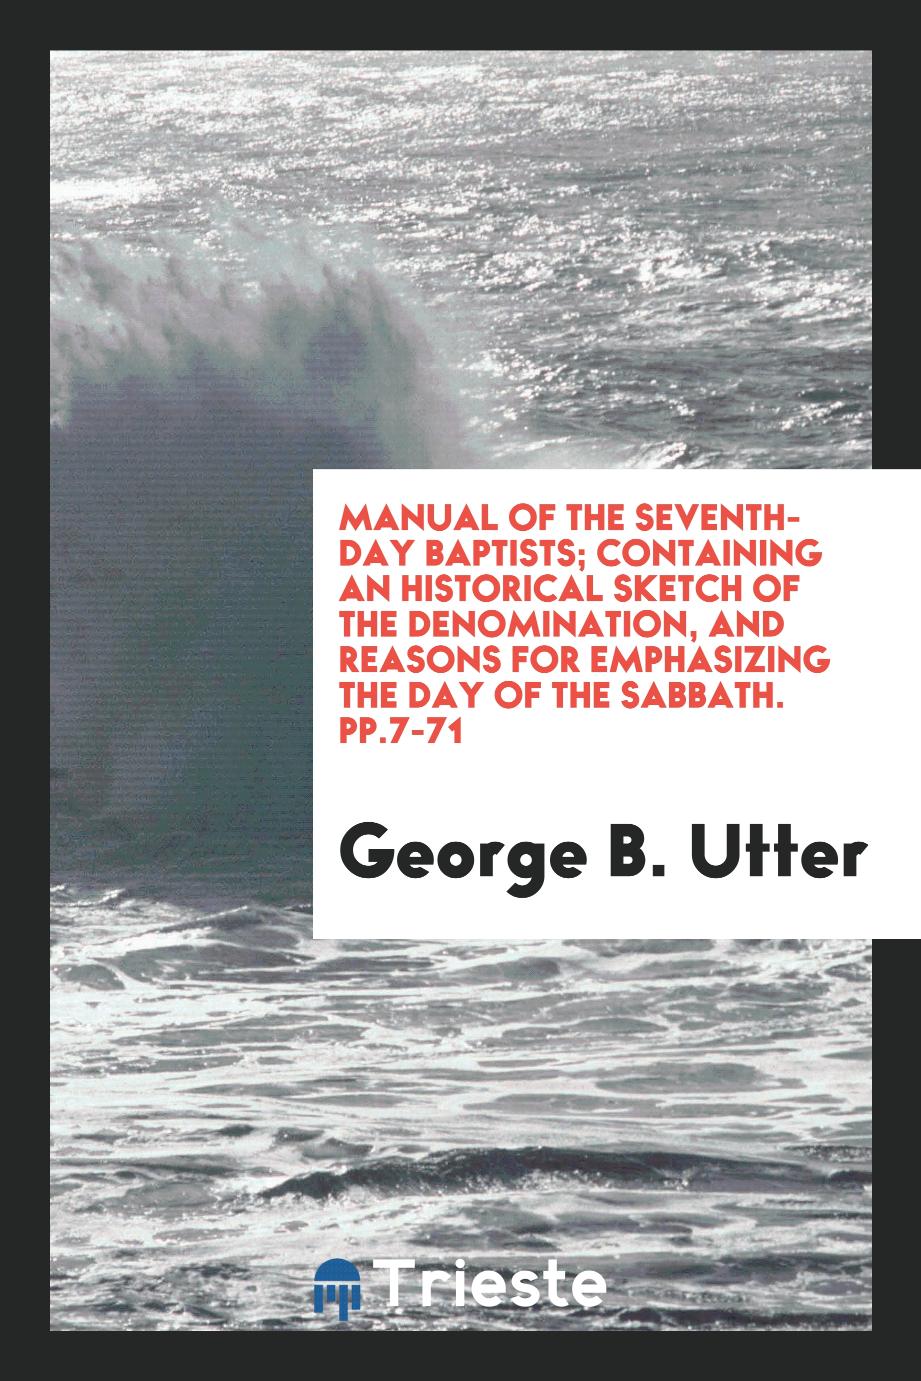 Manual of the Seventh-Day Baptists; Containing an Historical Sketch of the Denomination, and Reasons for Emphasizing the Day of the Sabbath. pp.7-71